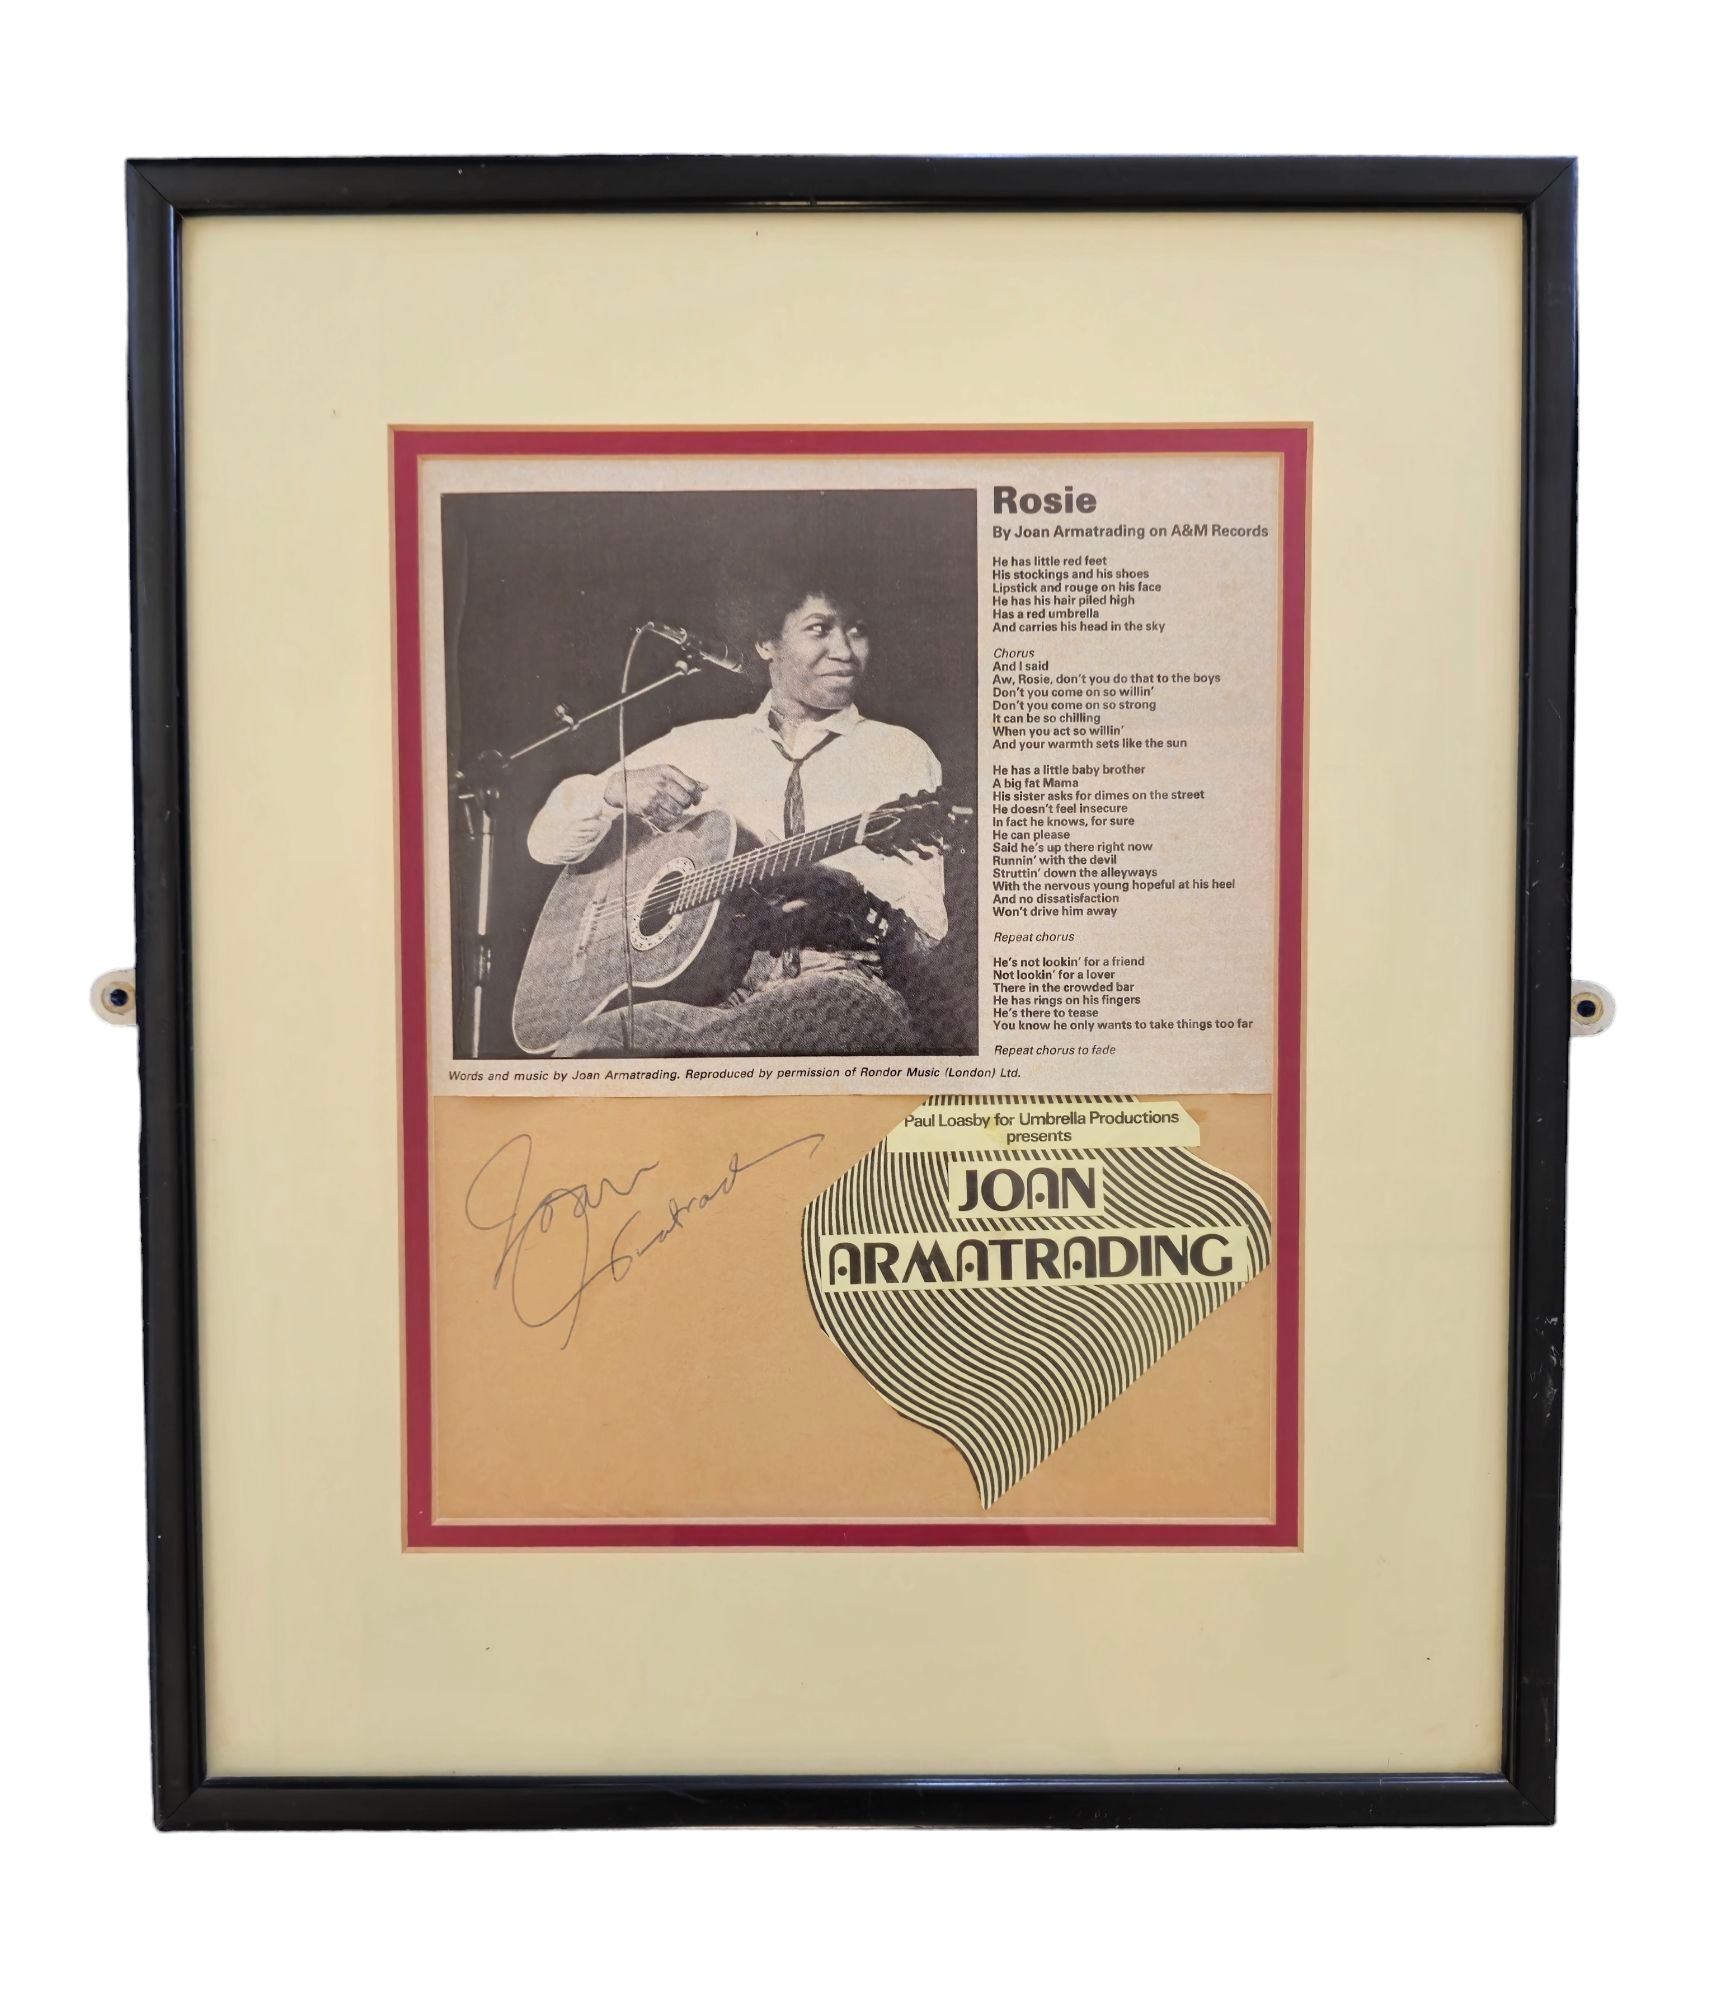 Joan Armatrading signature piece with black and white newspaper cut out photo with song lyrics